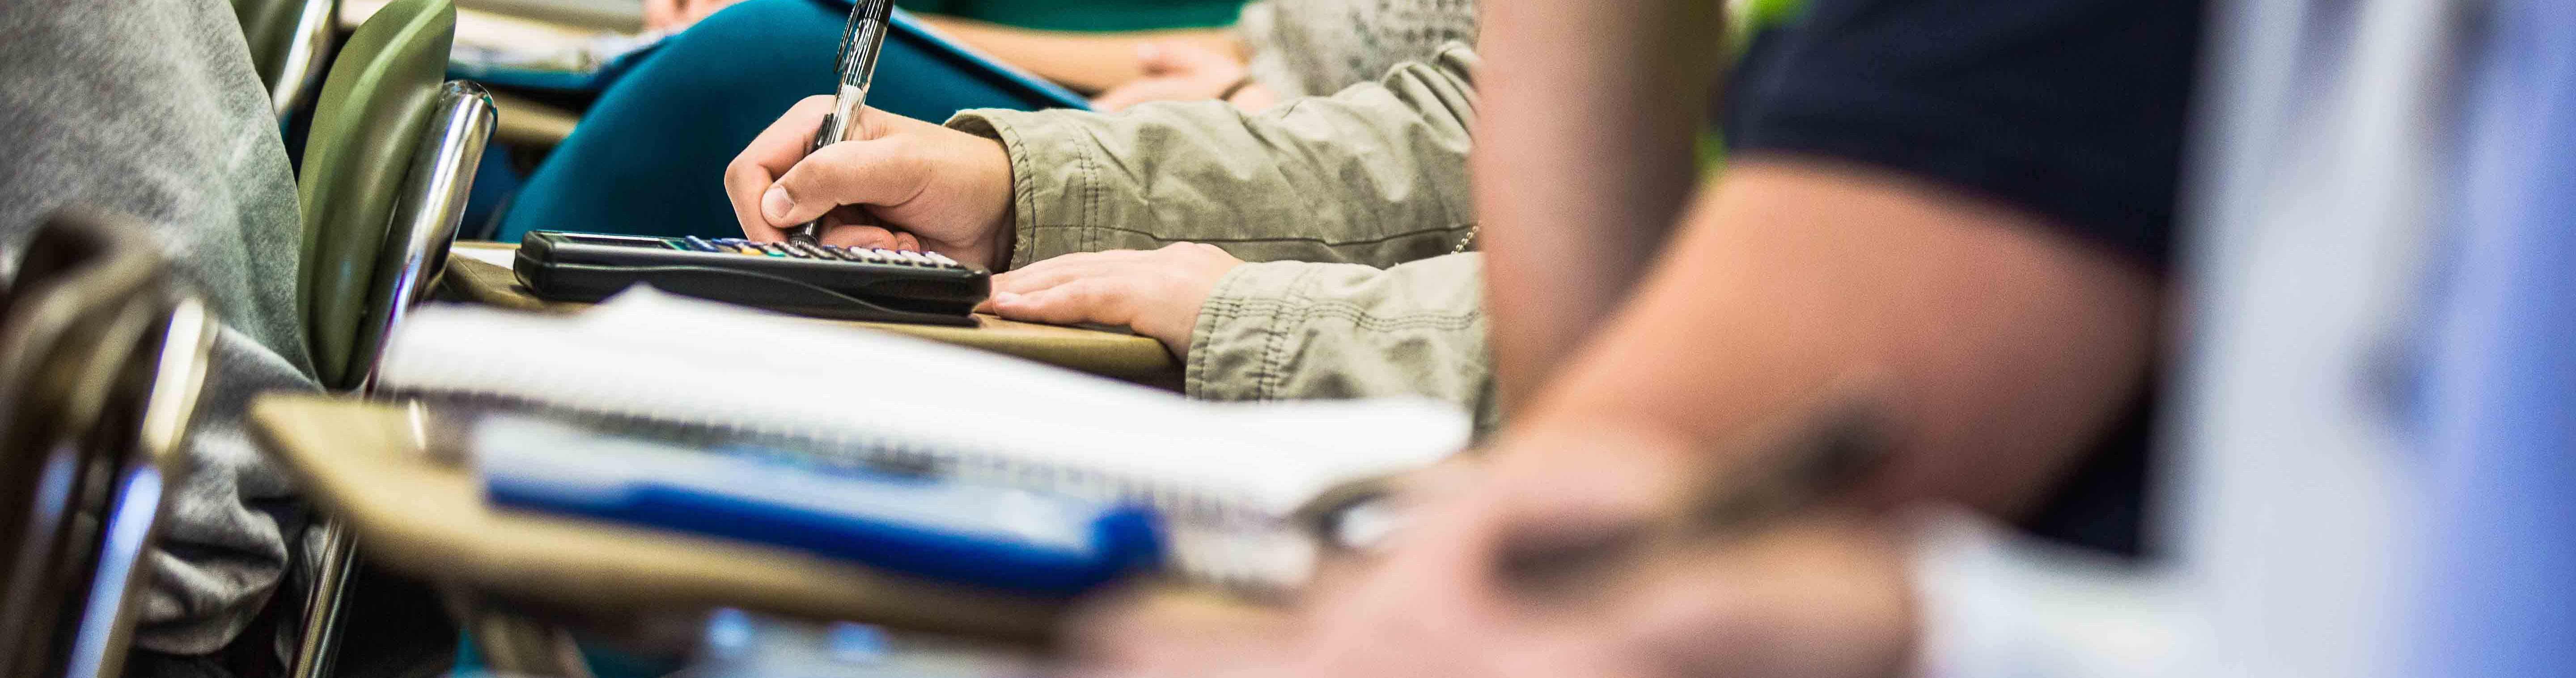 A photo of hands taking notes with a calculator on a desk